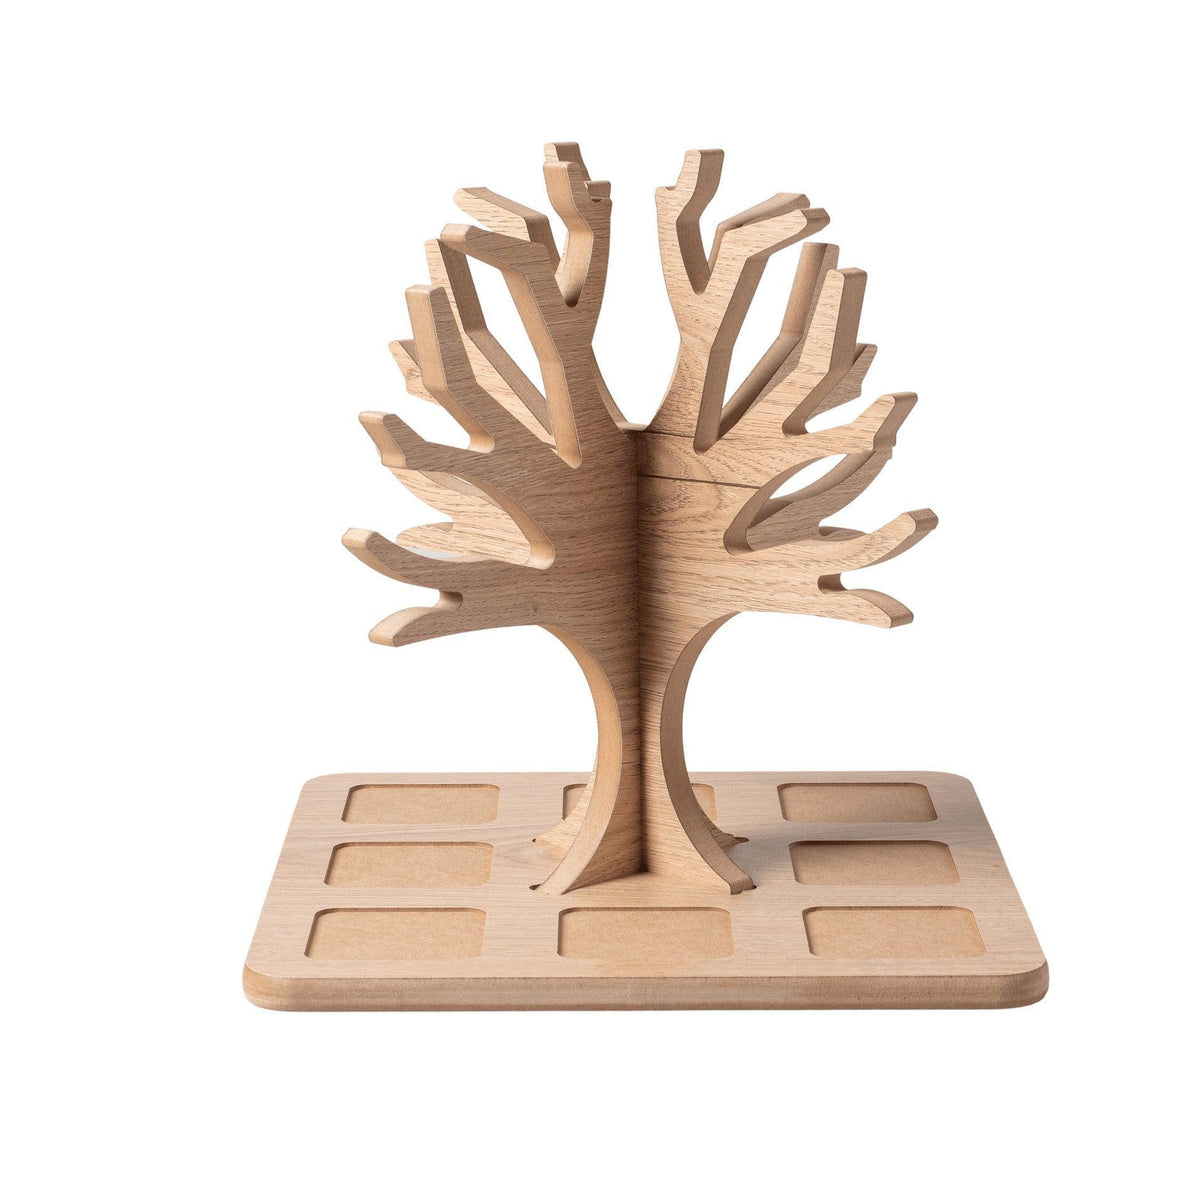 Jewellery Tree - Jewelry Holders - e-WOOD Collection - ewoodcollection.com